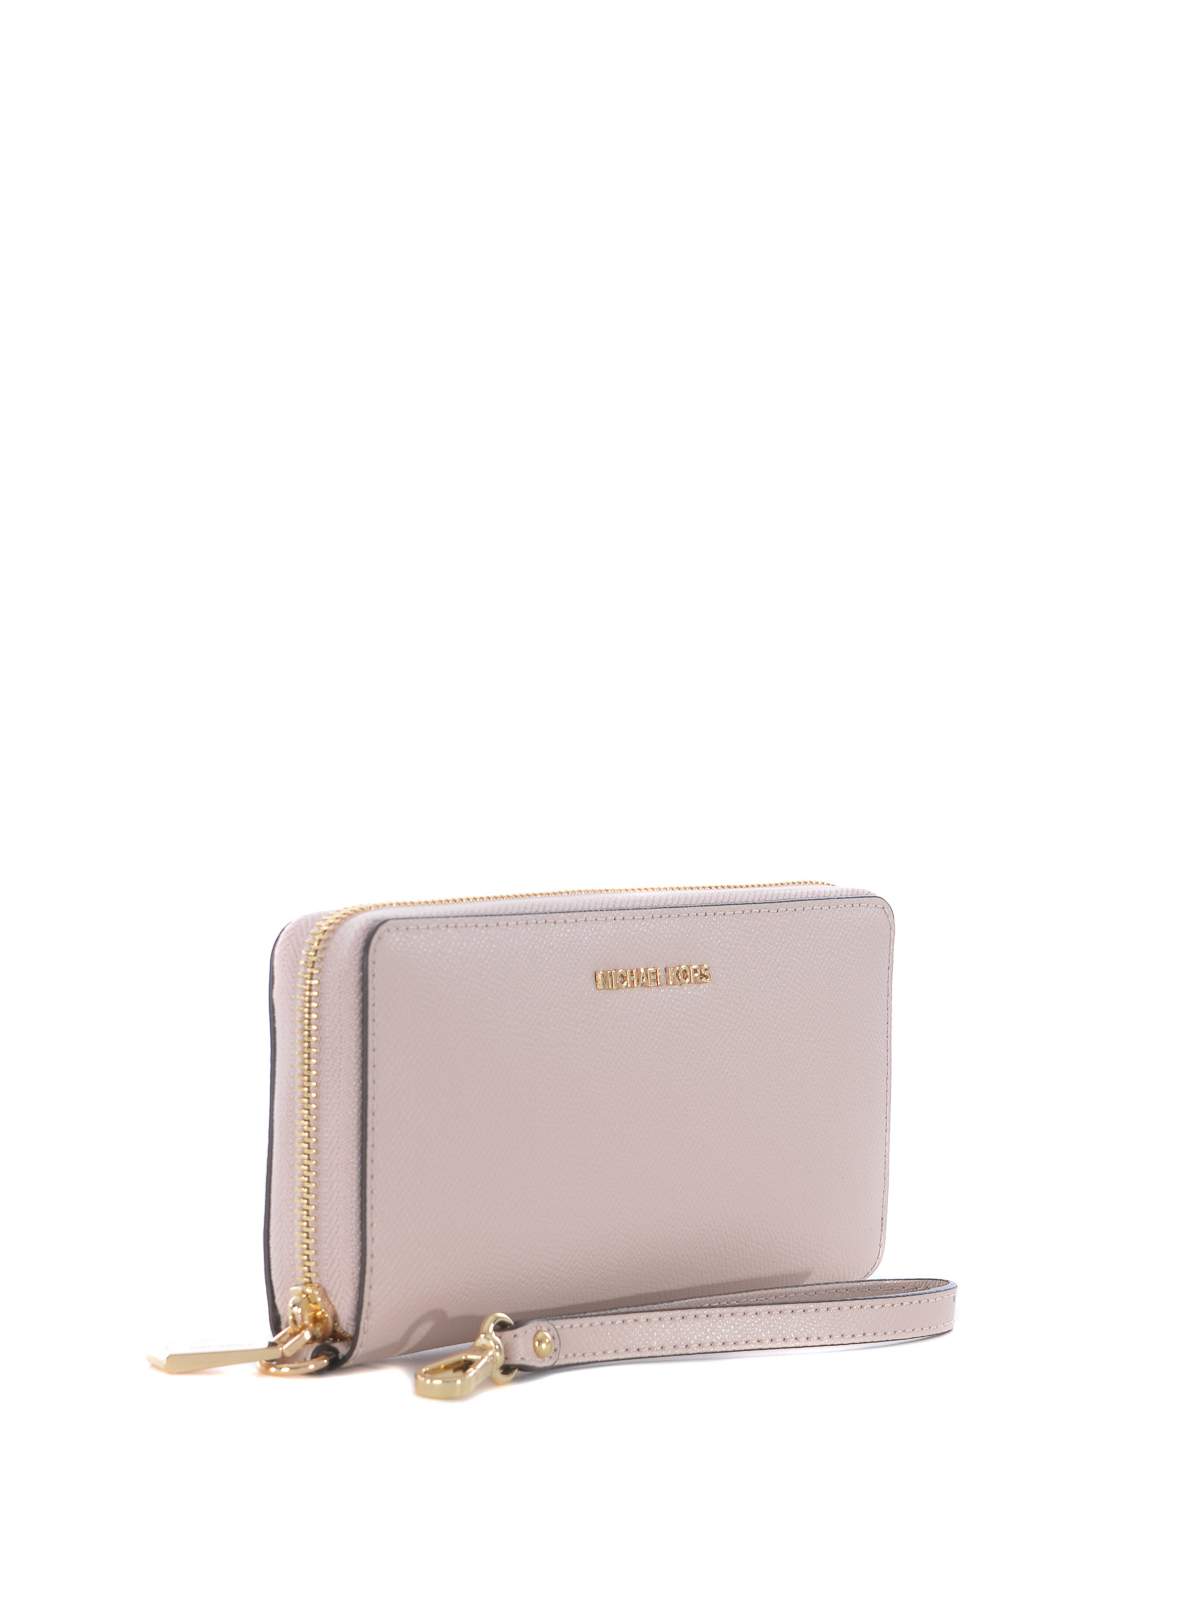 Light pink saffiano leather wallet 